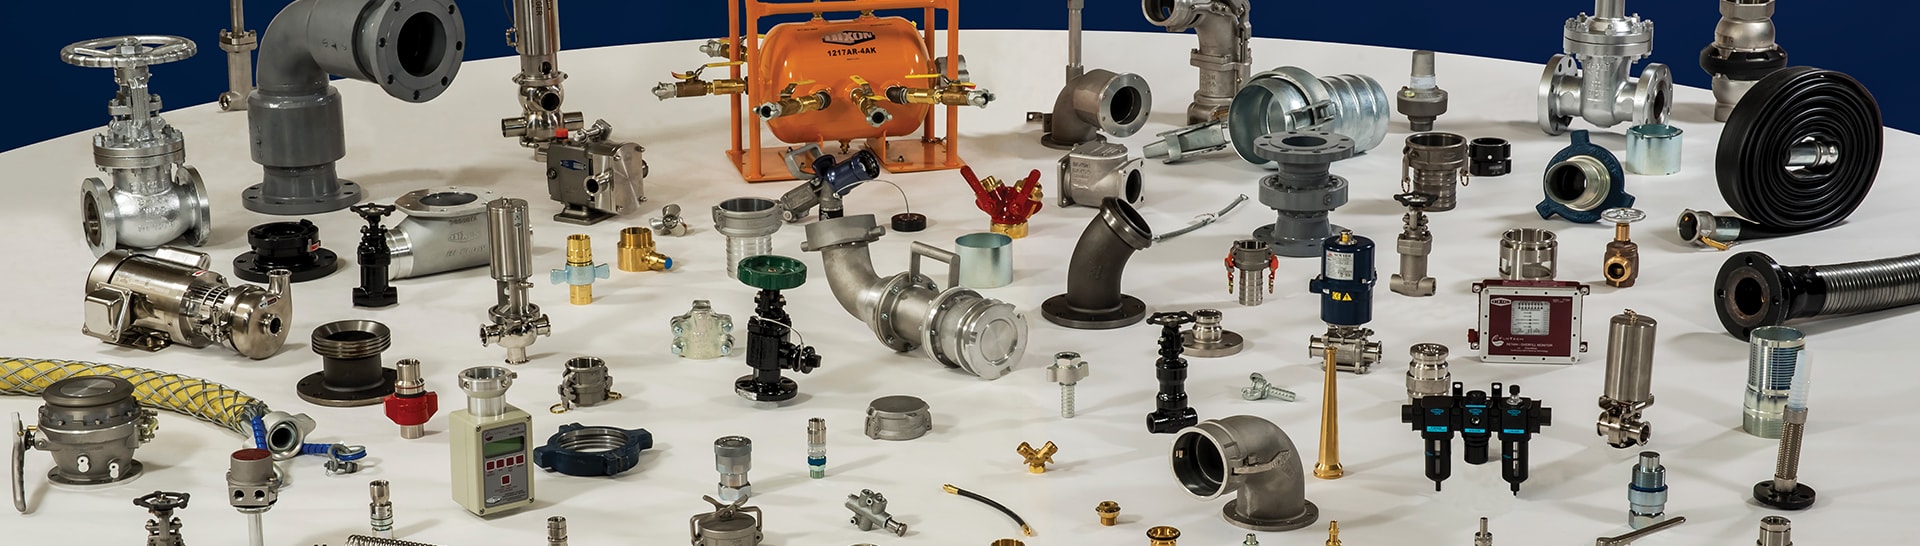 This is an image of a wide array of industrial couplings